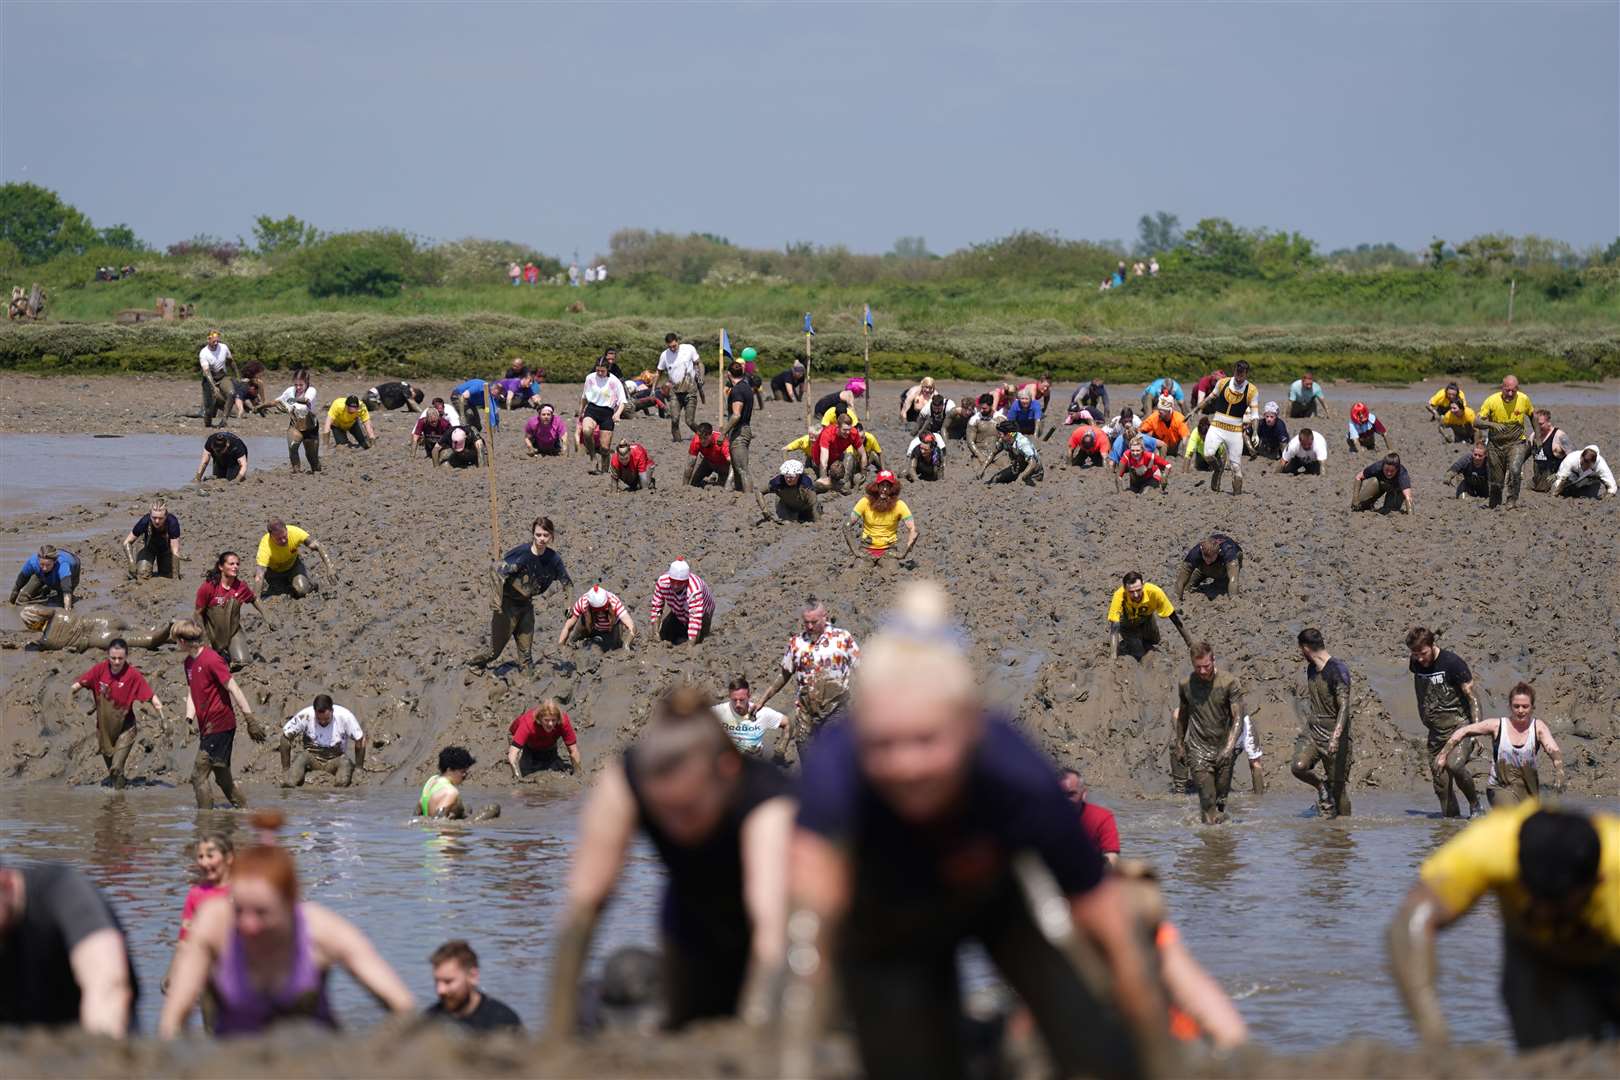 Competitors take part in the annual Maldon Mud Race in May (PA)